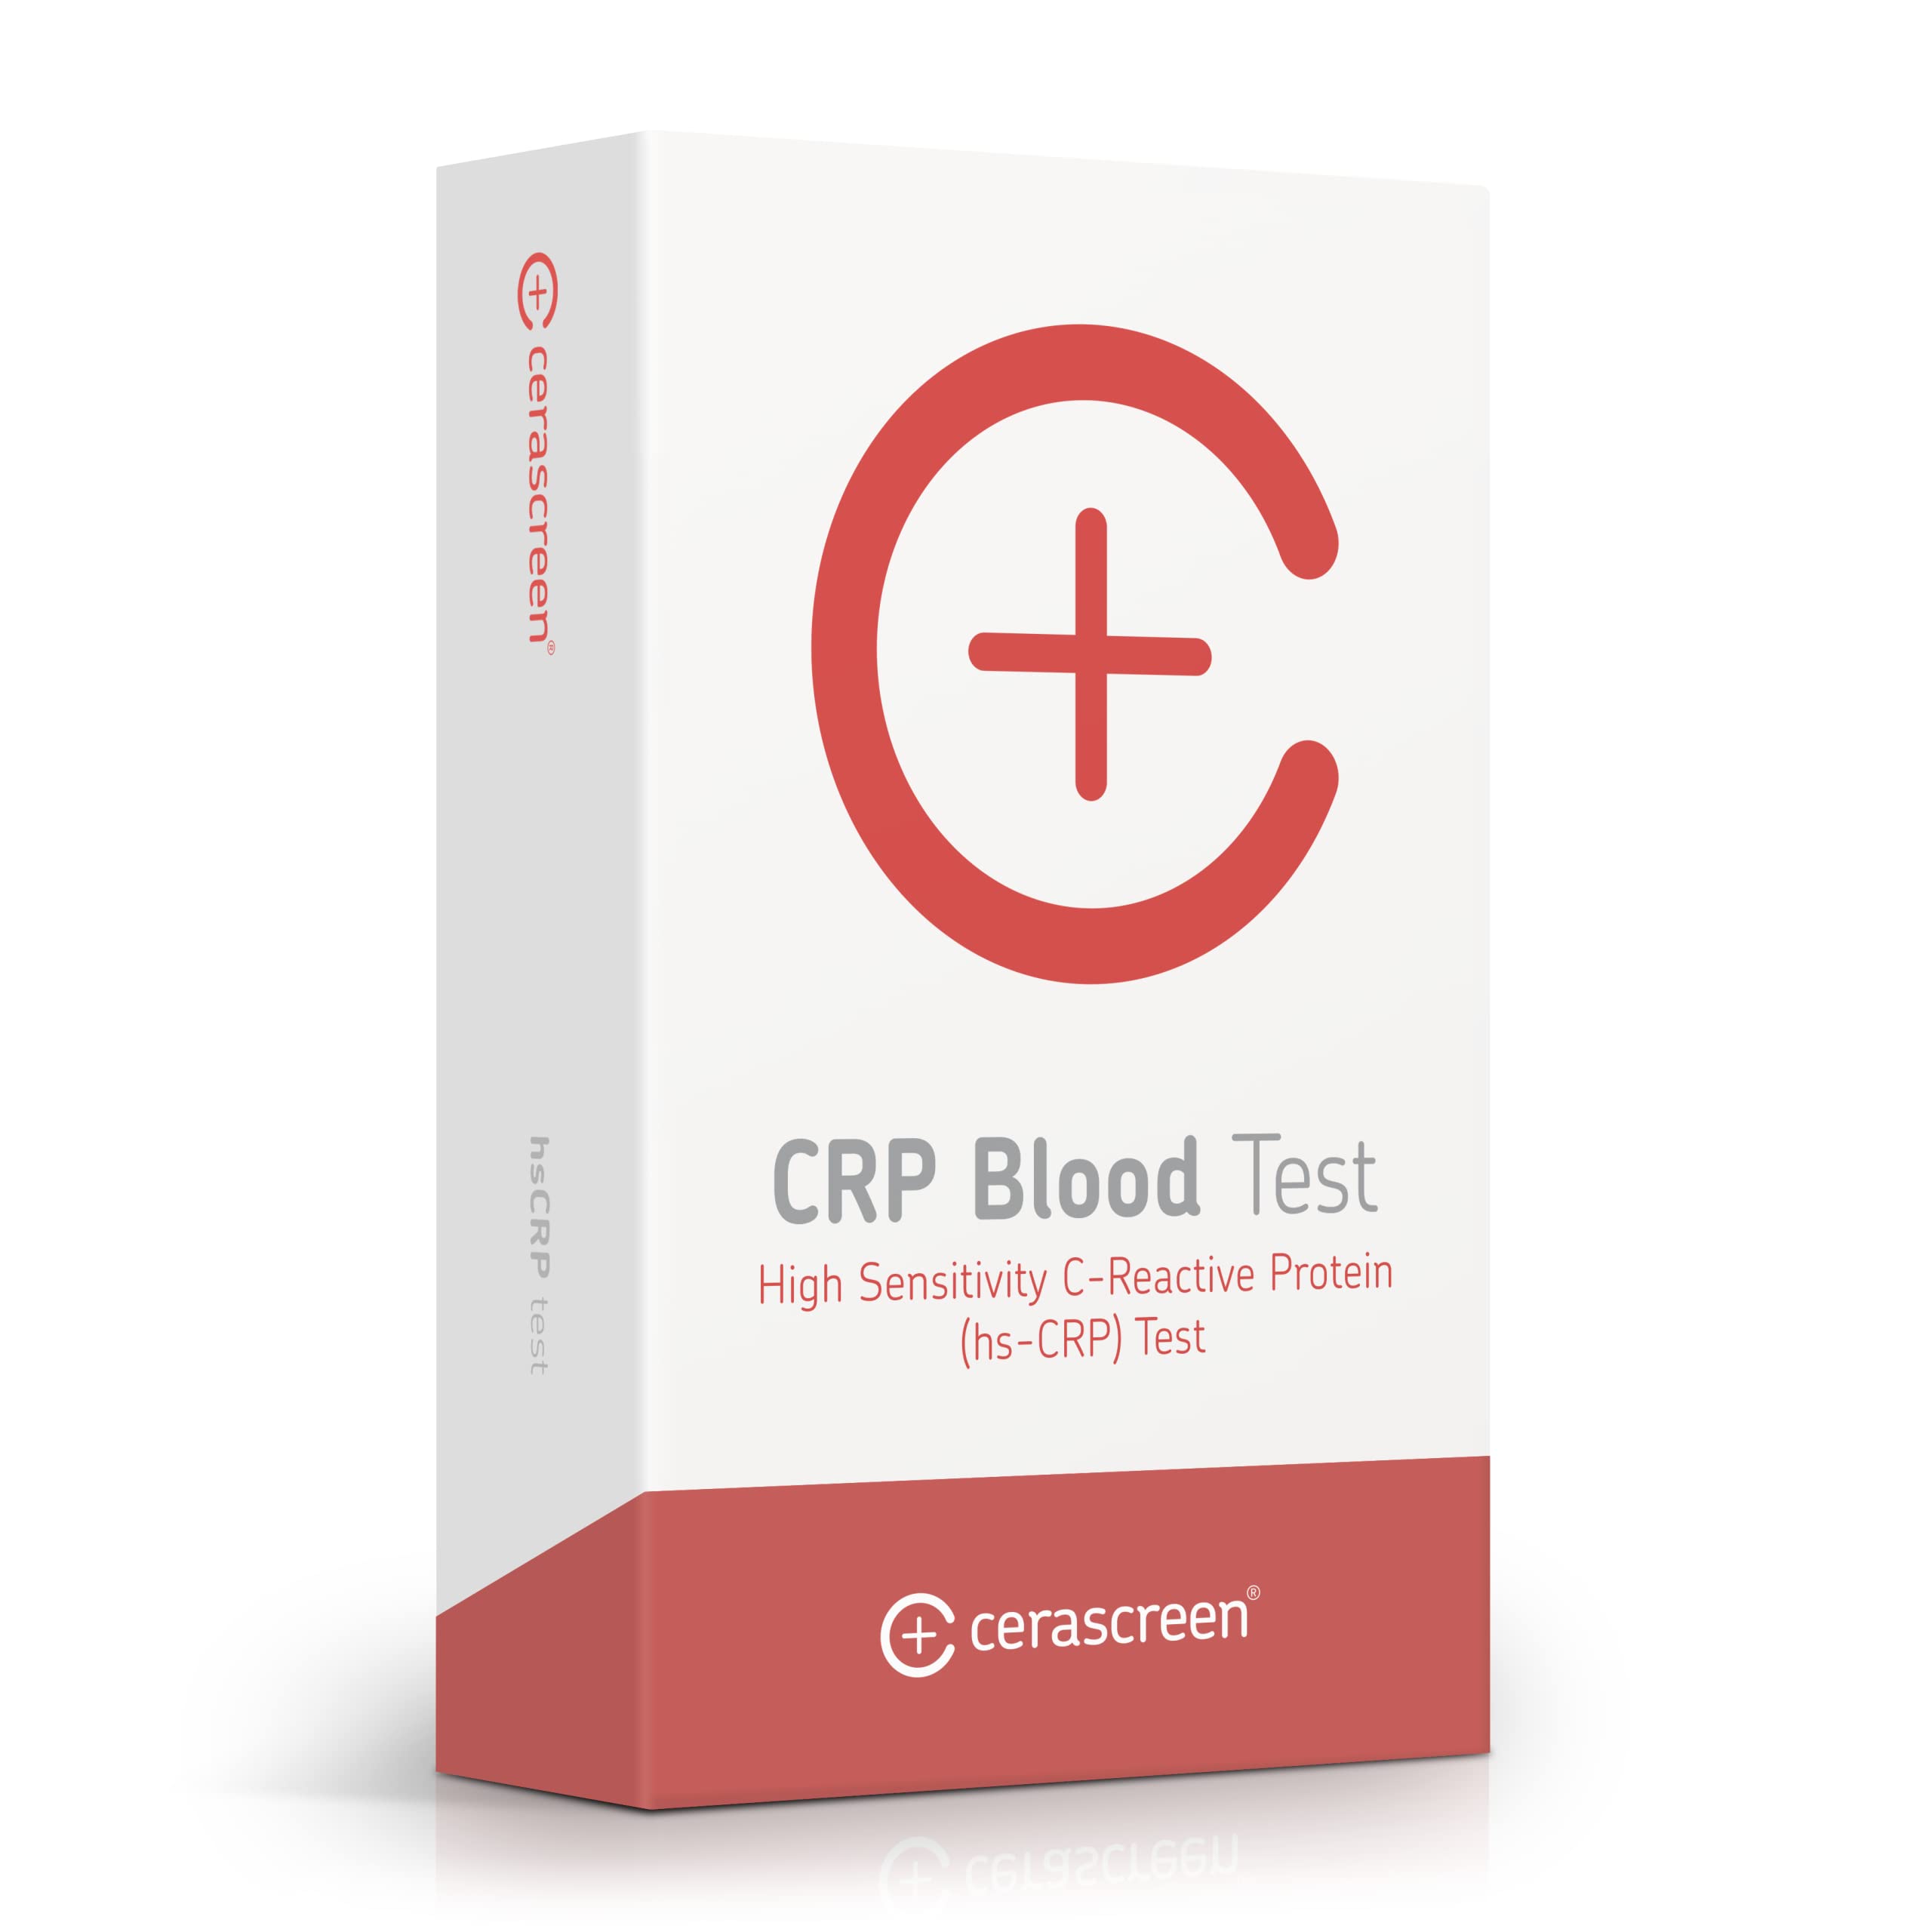 CRP Test by CERASCREEN - Prevention of atherosclerosis + Cardiovascular Disease | Test Highly Sensitive C-Reactive Protein from The Comfort of Your Home to Prevent Inflammation | Lab Analysis